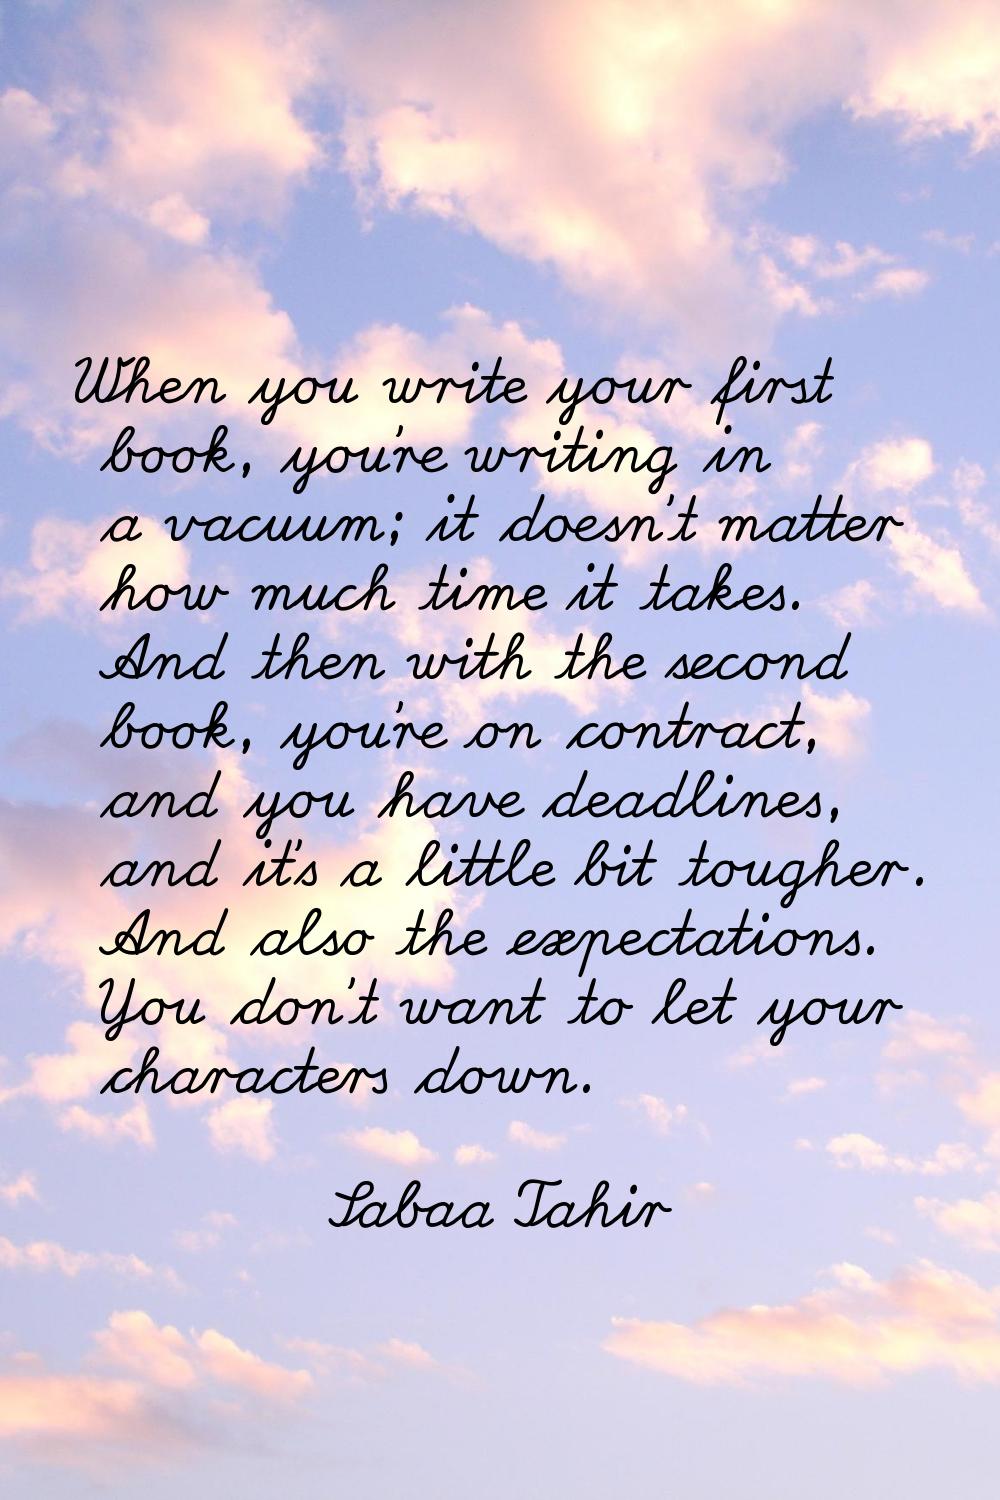 When you write your first book, you're writing in a vacuum; it doesn't matter how much time it take